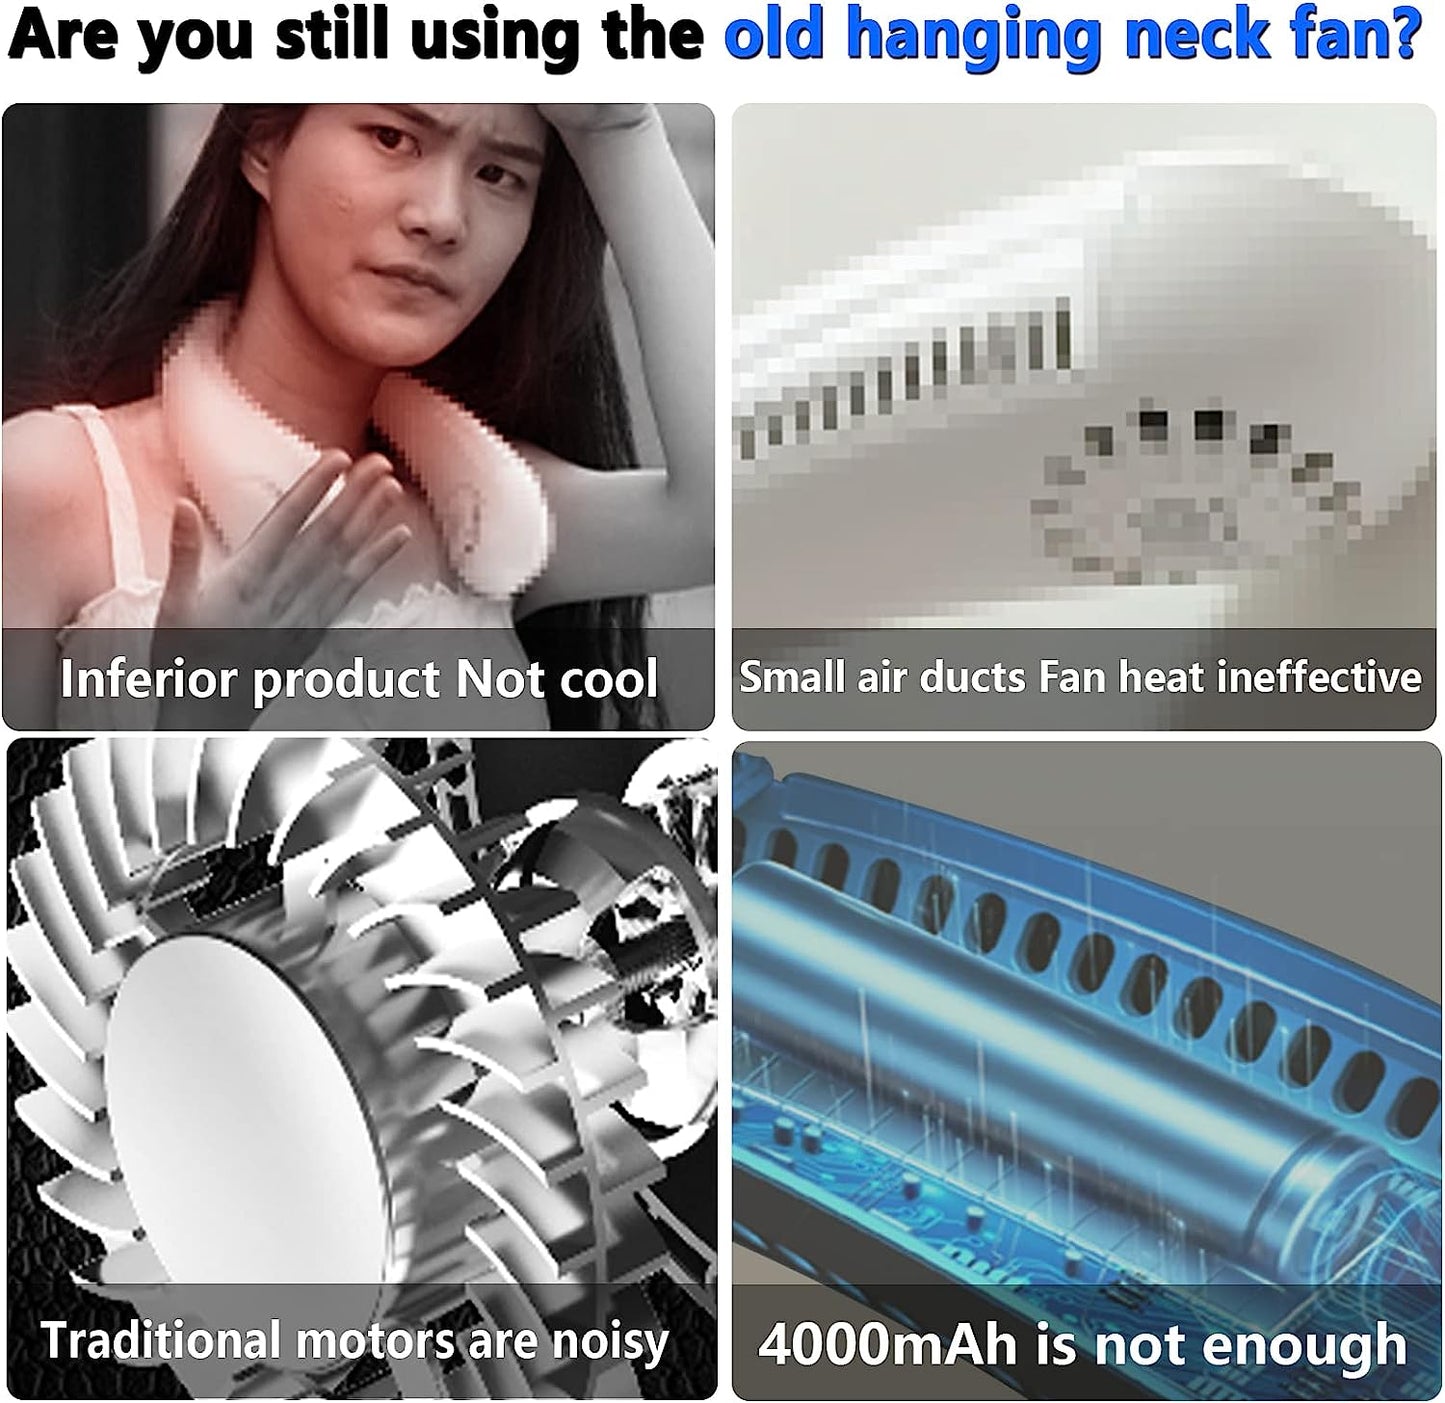 Neck air conditioner 24 hours of battery life 8000mAh neck fan Portable neck air conditioner Ultra-quiet bladeless fan design No curling Even air volume on both sides